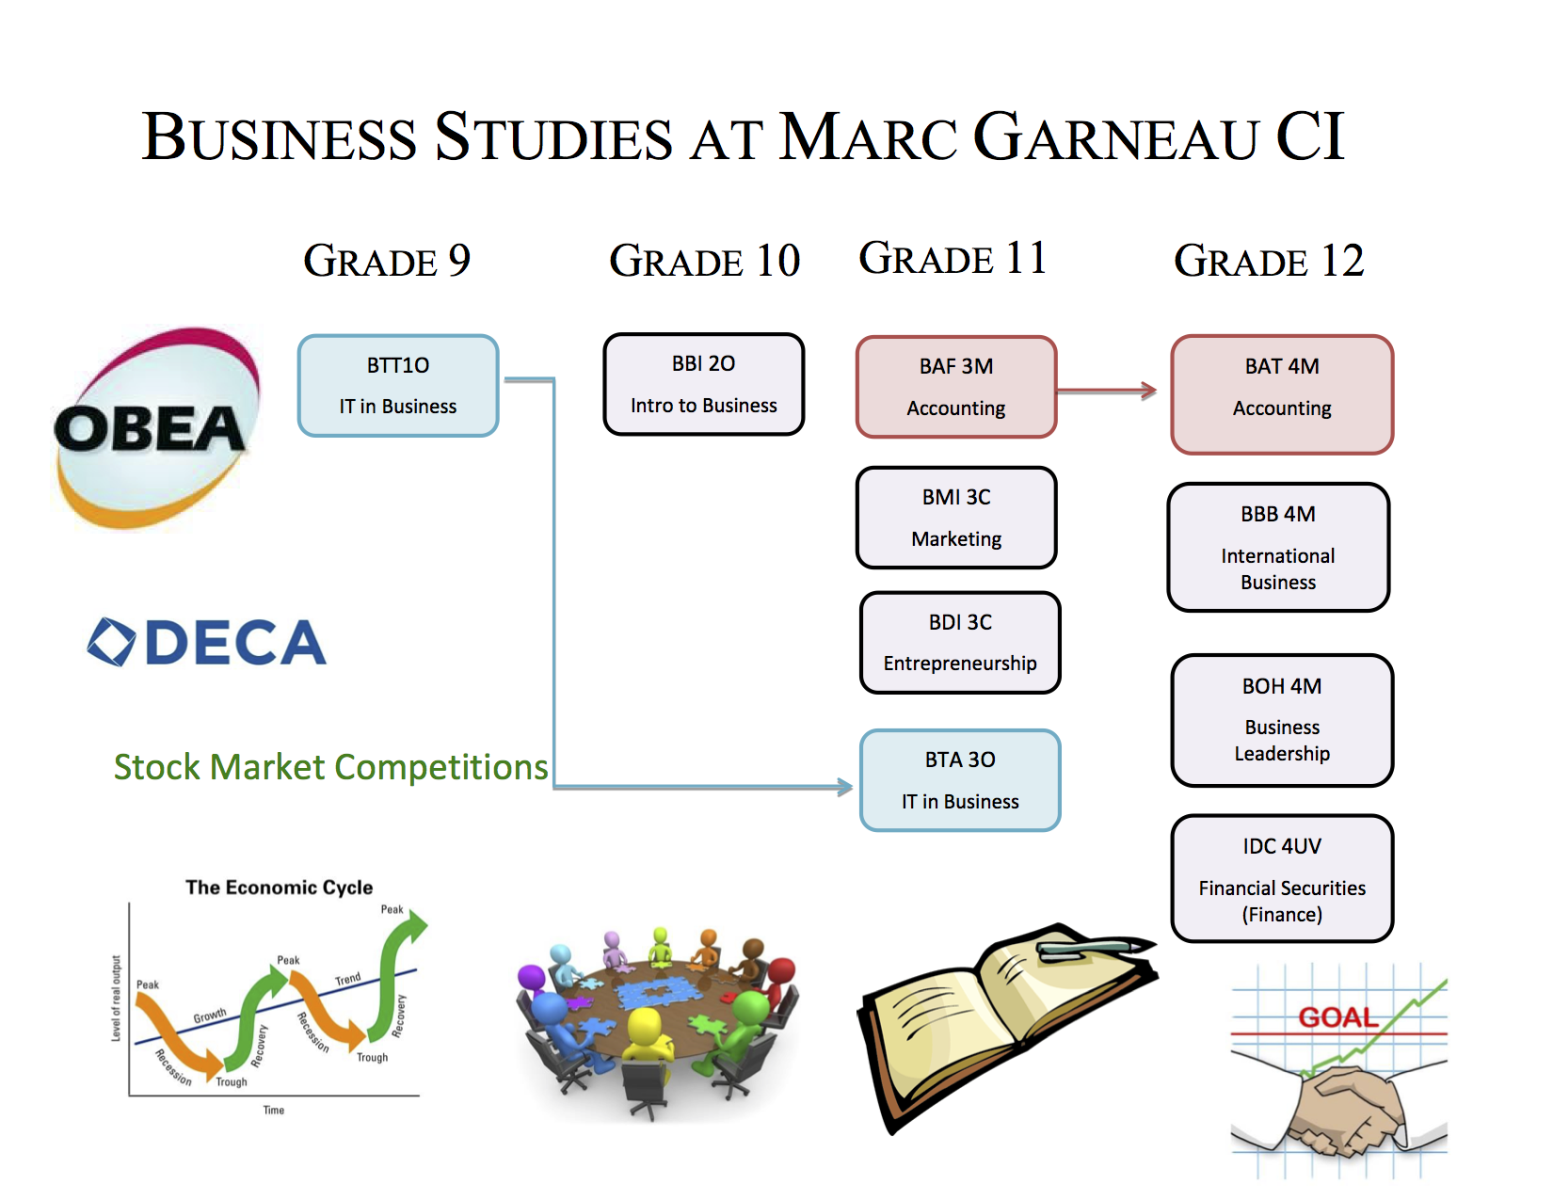 Business Course Selection Flowchart provided at Marc Garneau